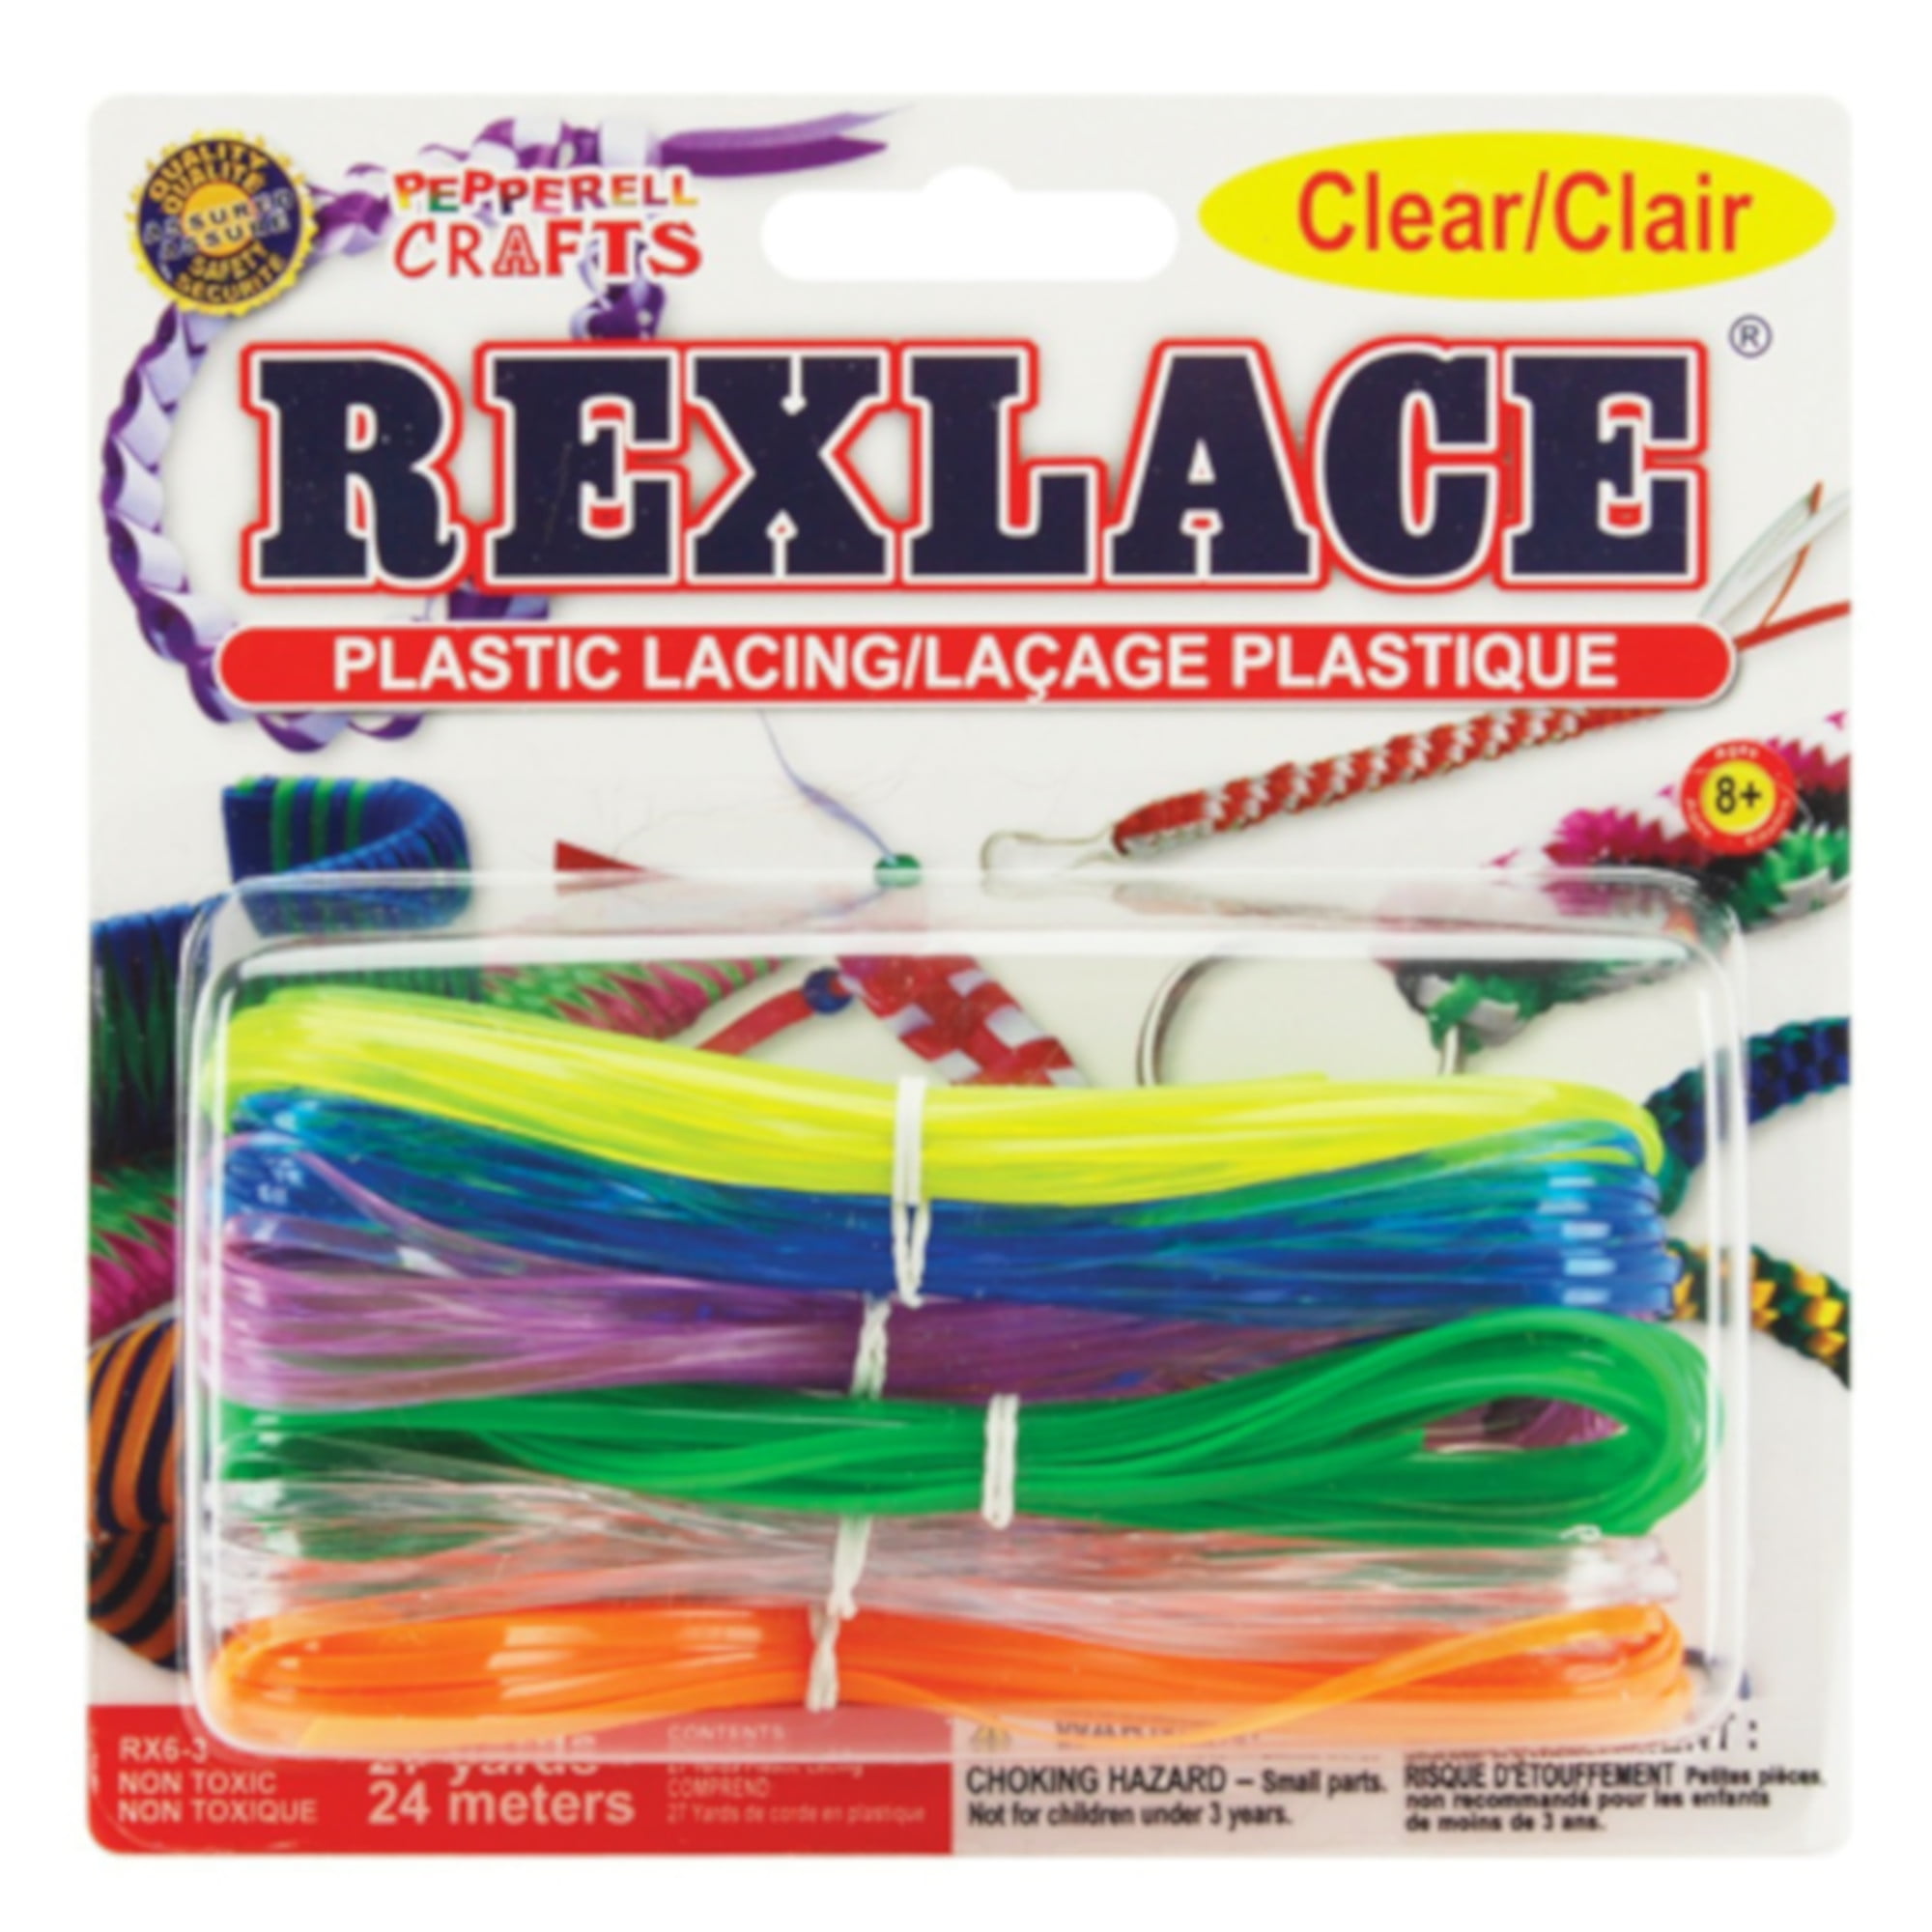 Pepperell Rexlace Plastic Lacing Cool Combo Variety Pack